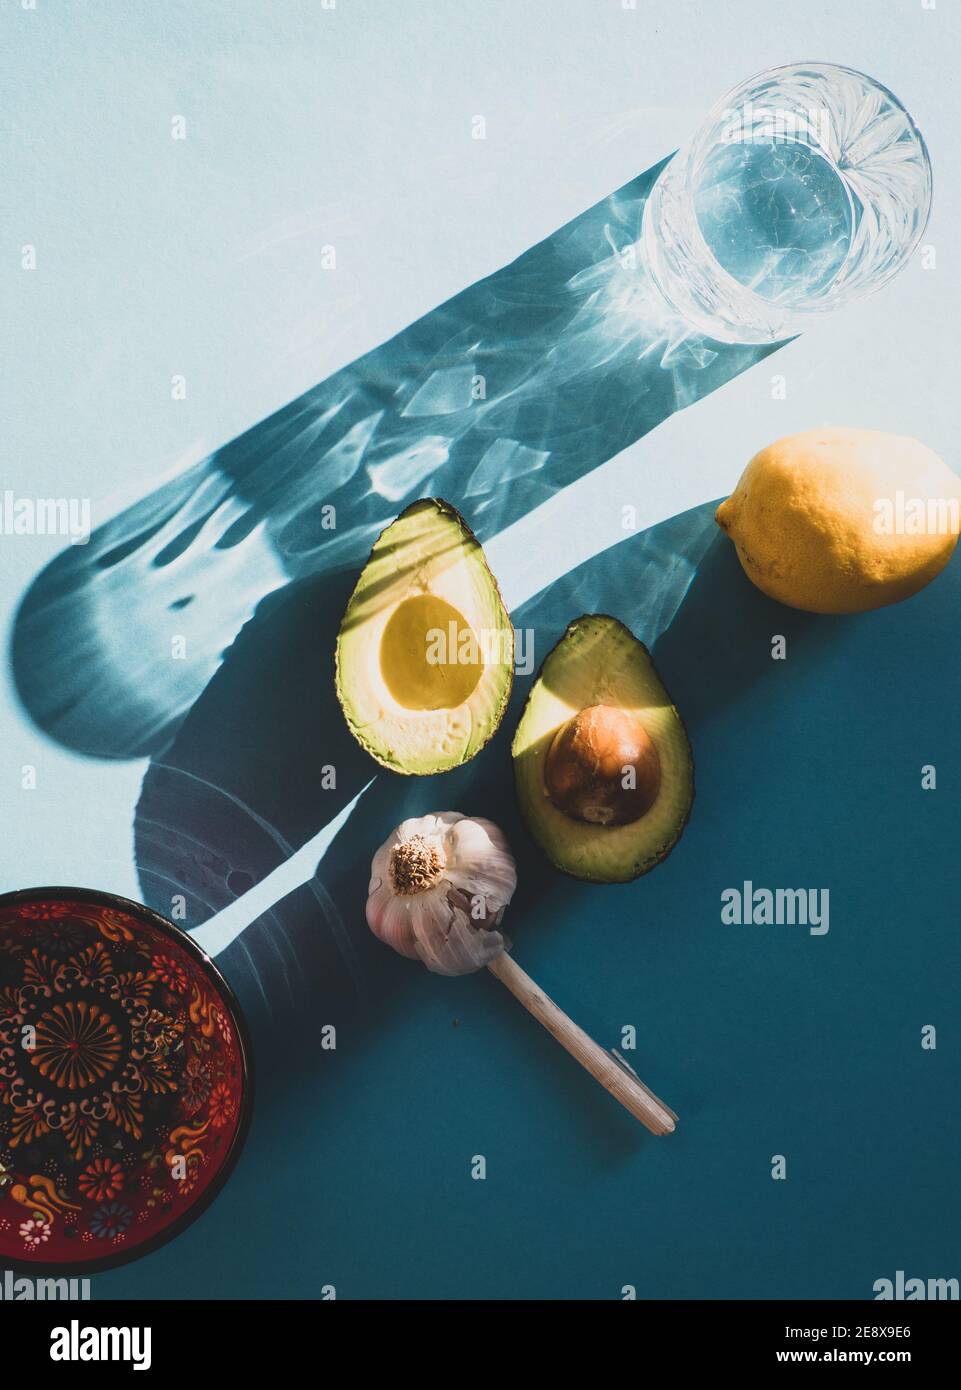 Ingredients for fresh Mexican Guacamole, two Avocado halves, garlic and lime/ lemon isolated on turquoise blue background Stock Photo